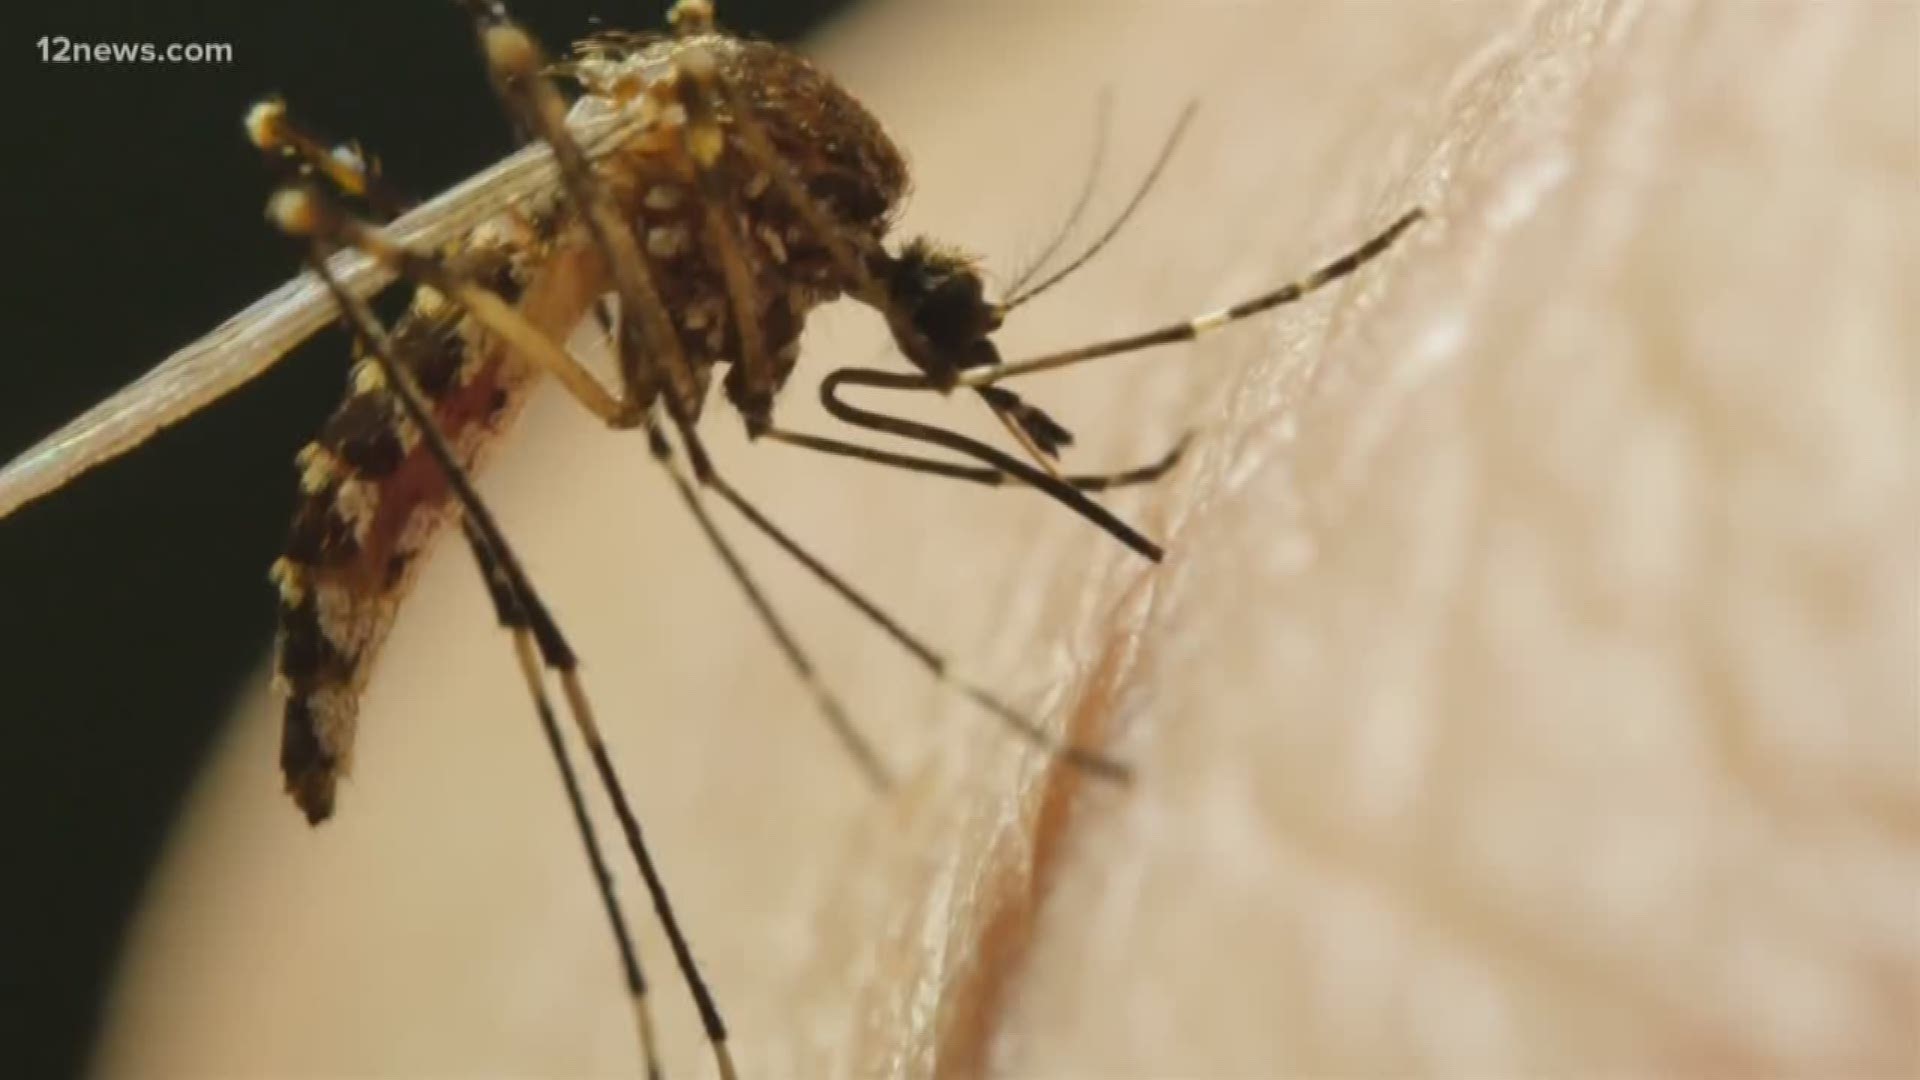 The latest samples show 87 mosquito samples came positive for West Nile Virus. At this time last year, there were just seven positive samples.